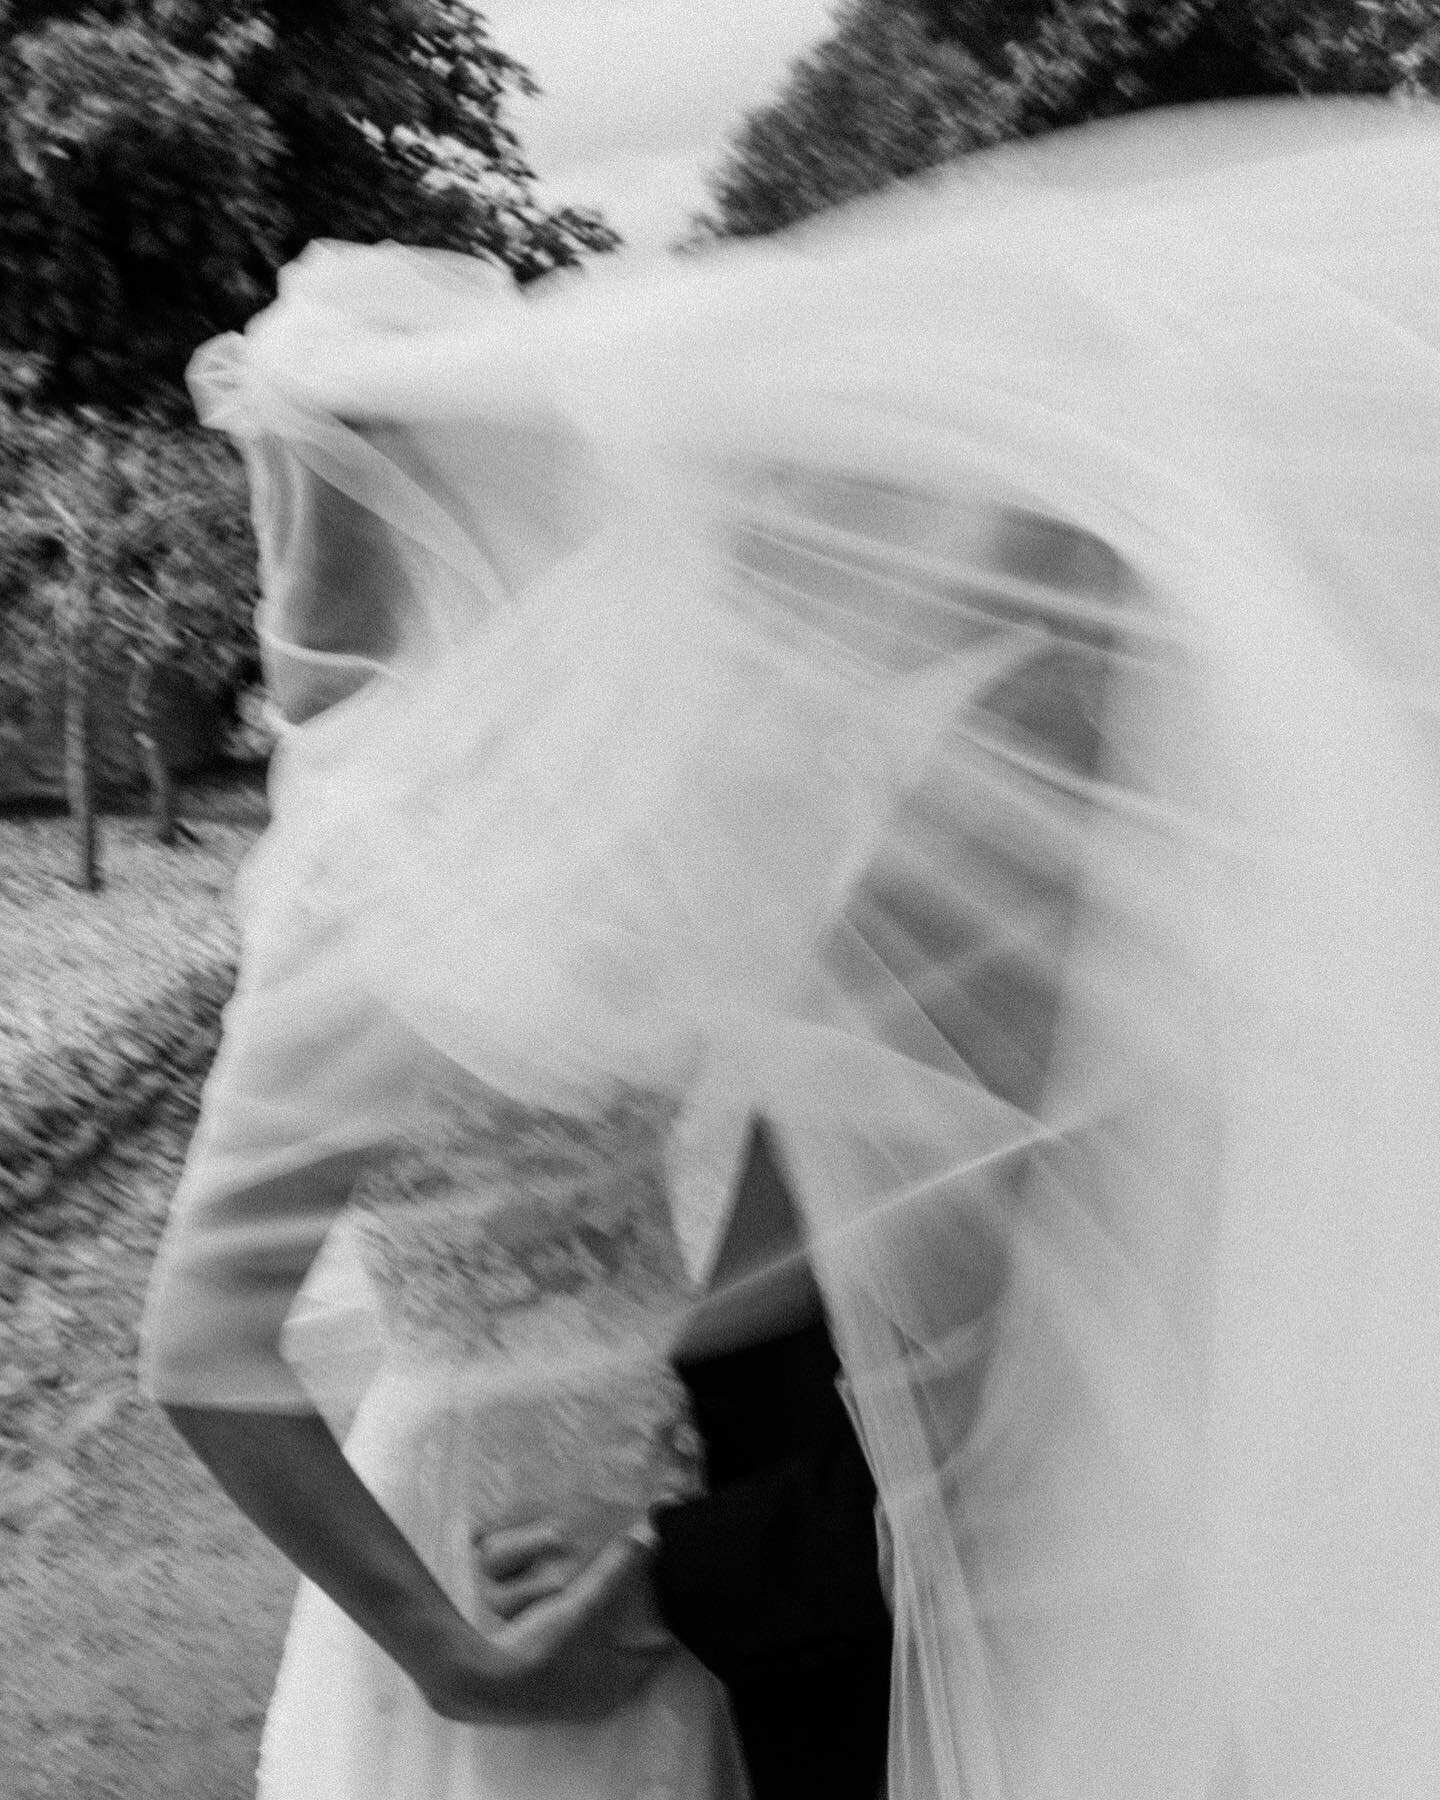 It&rsquo;s a big statement, but I think this is favourite shot of all time, so far. Classic black and white with motion. From a wedding I shot with @kraak.co.za @hannes_van_kraak @eduan_roos at @babylonstoren end of last year. This one needs to be in